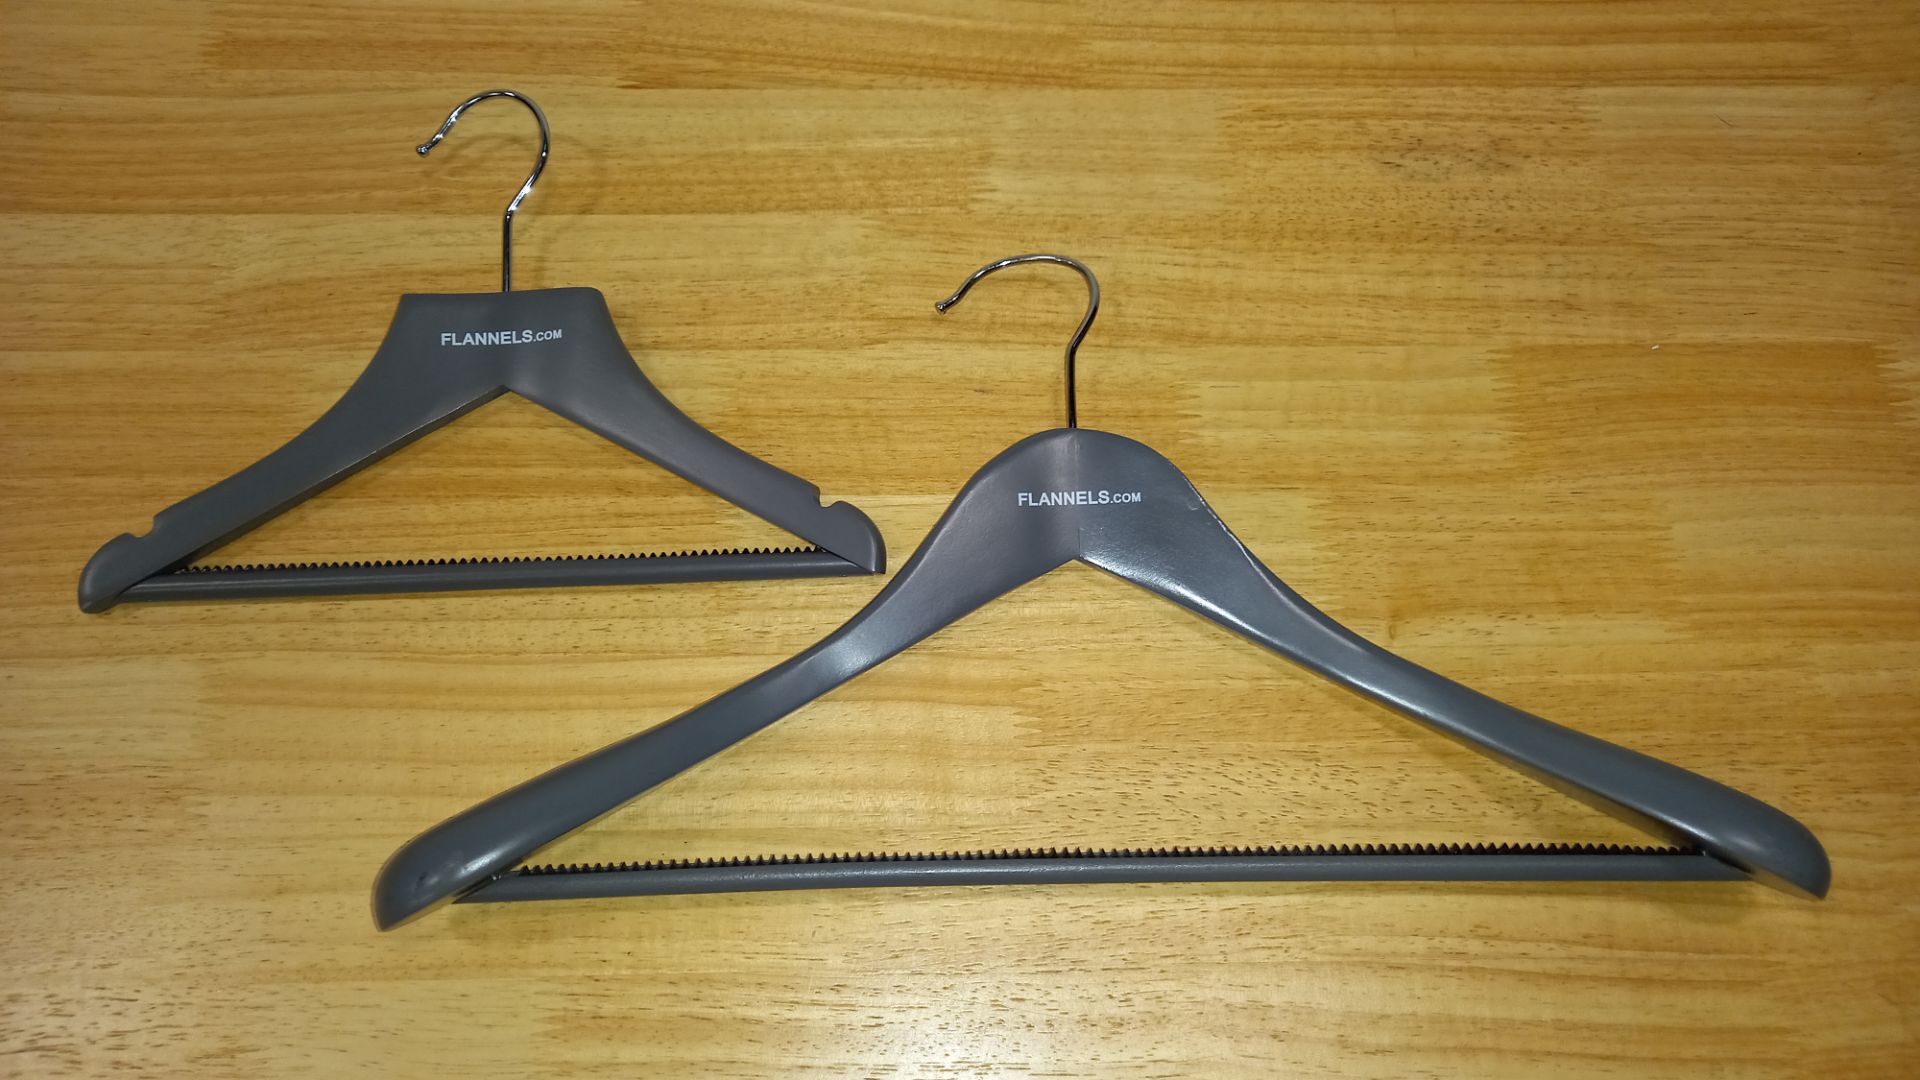 APPROX 400 X STORE USED FLANNELS BRANDED CLOTHING HANGERS MAINLY COAT STYLE (SOME CHILDREN'S) WITH